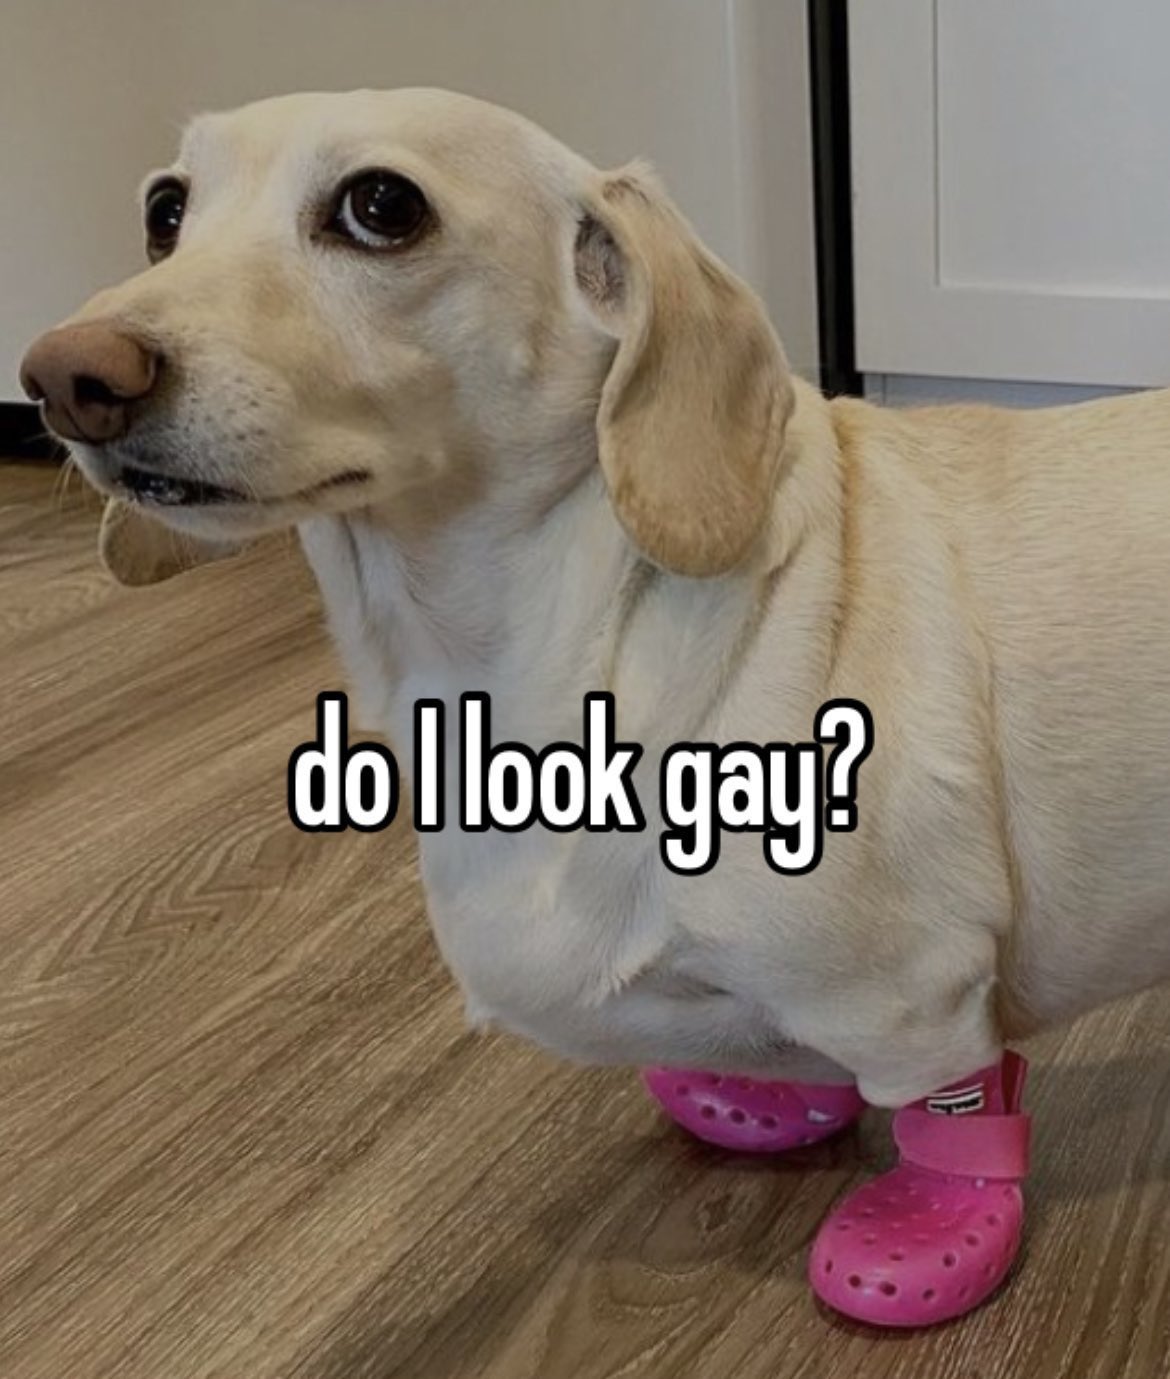 that homophobic dog meme with text:do i look gay?